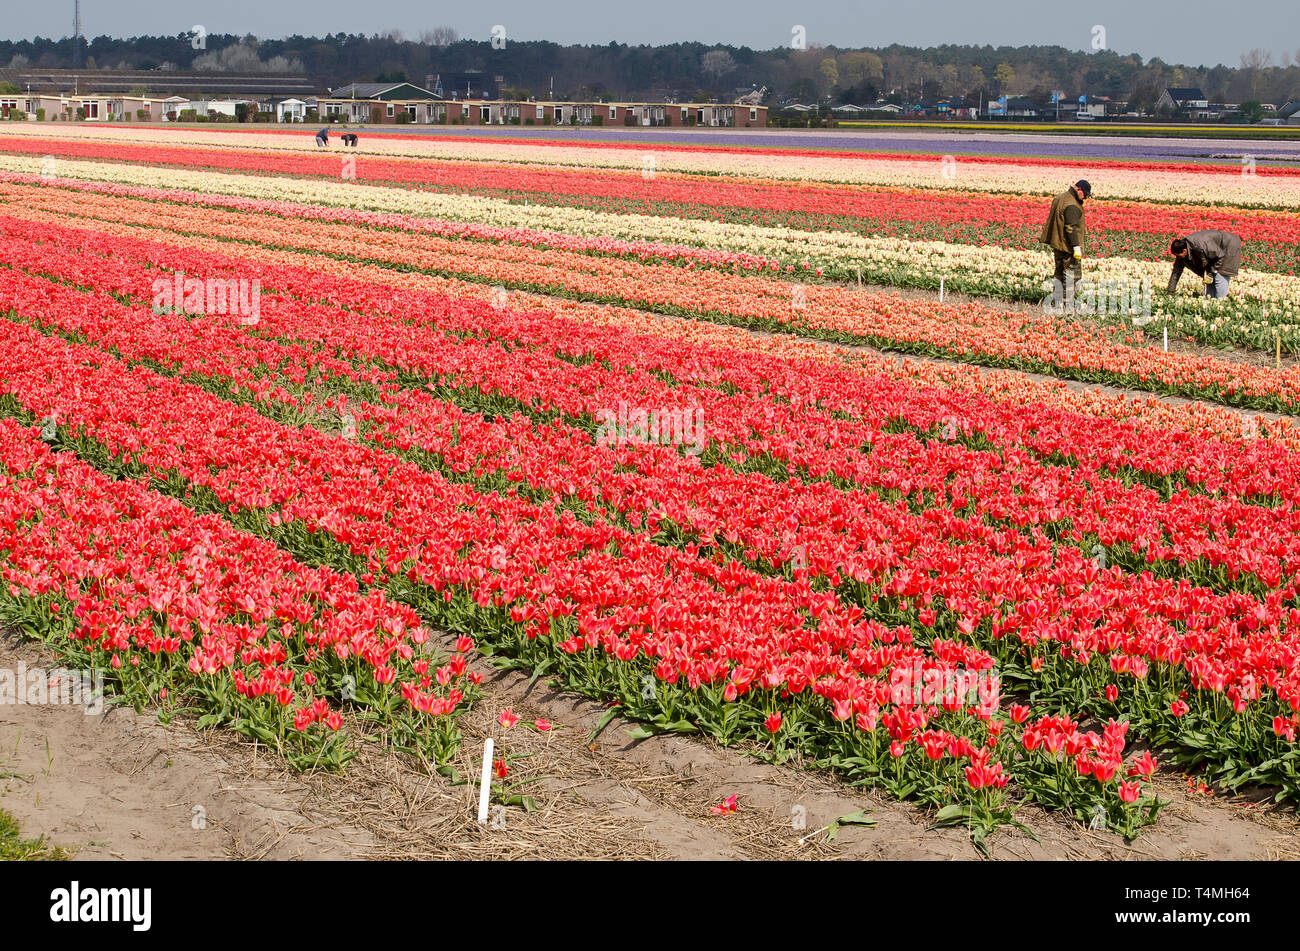 Noordwijkerhout, The Netherlands, April 15, 2019: multi-colored tulip field with several agricultural labourers at work Stock Photo